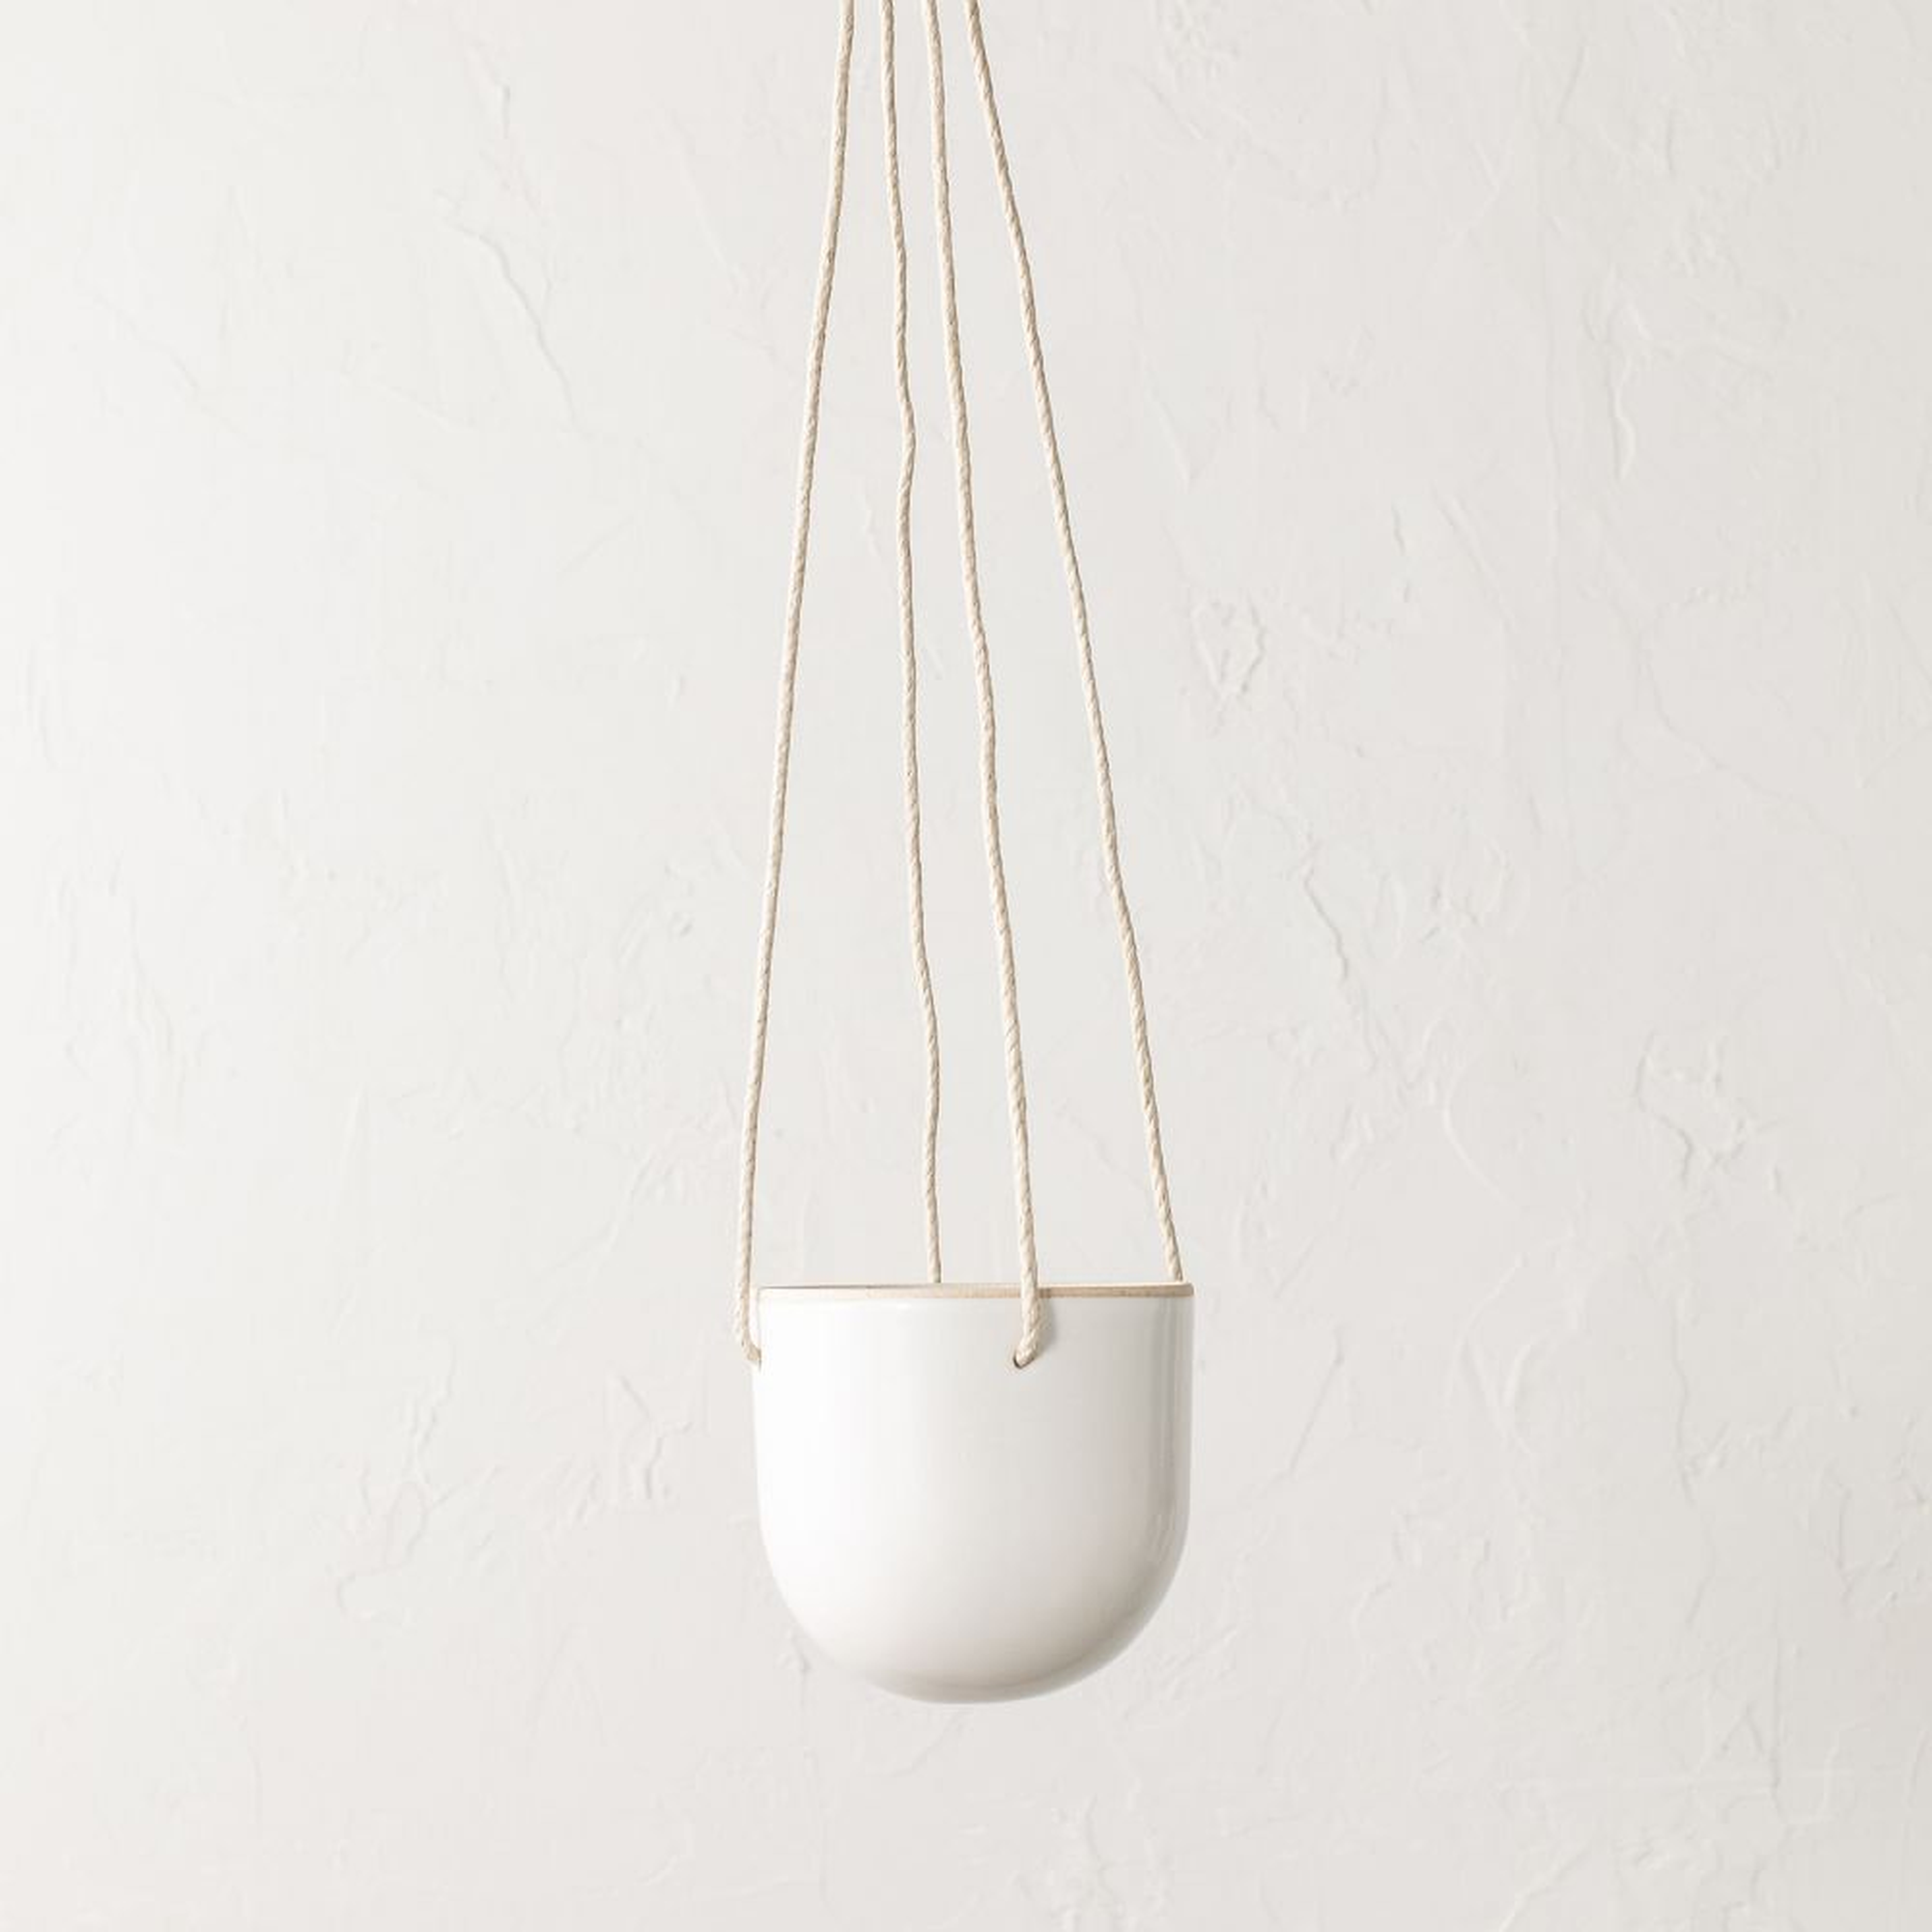 Arched Hanging Planter, Small, White - West Elm